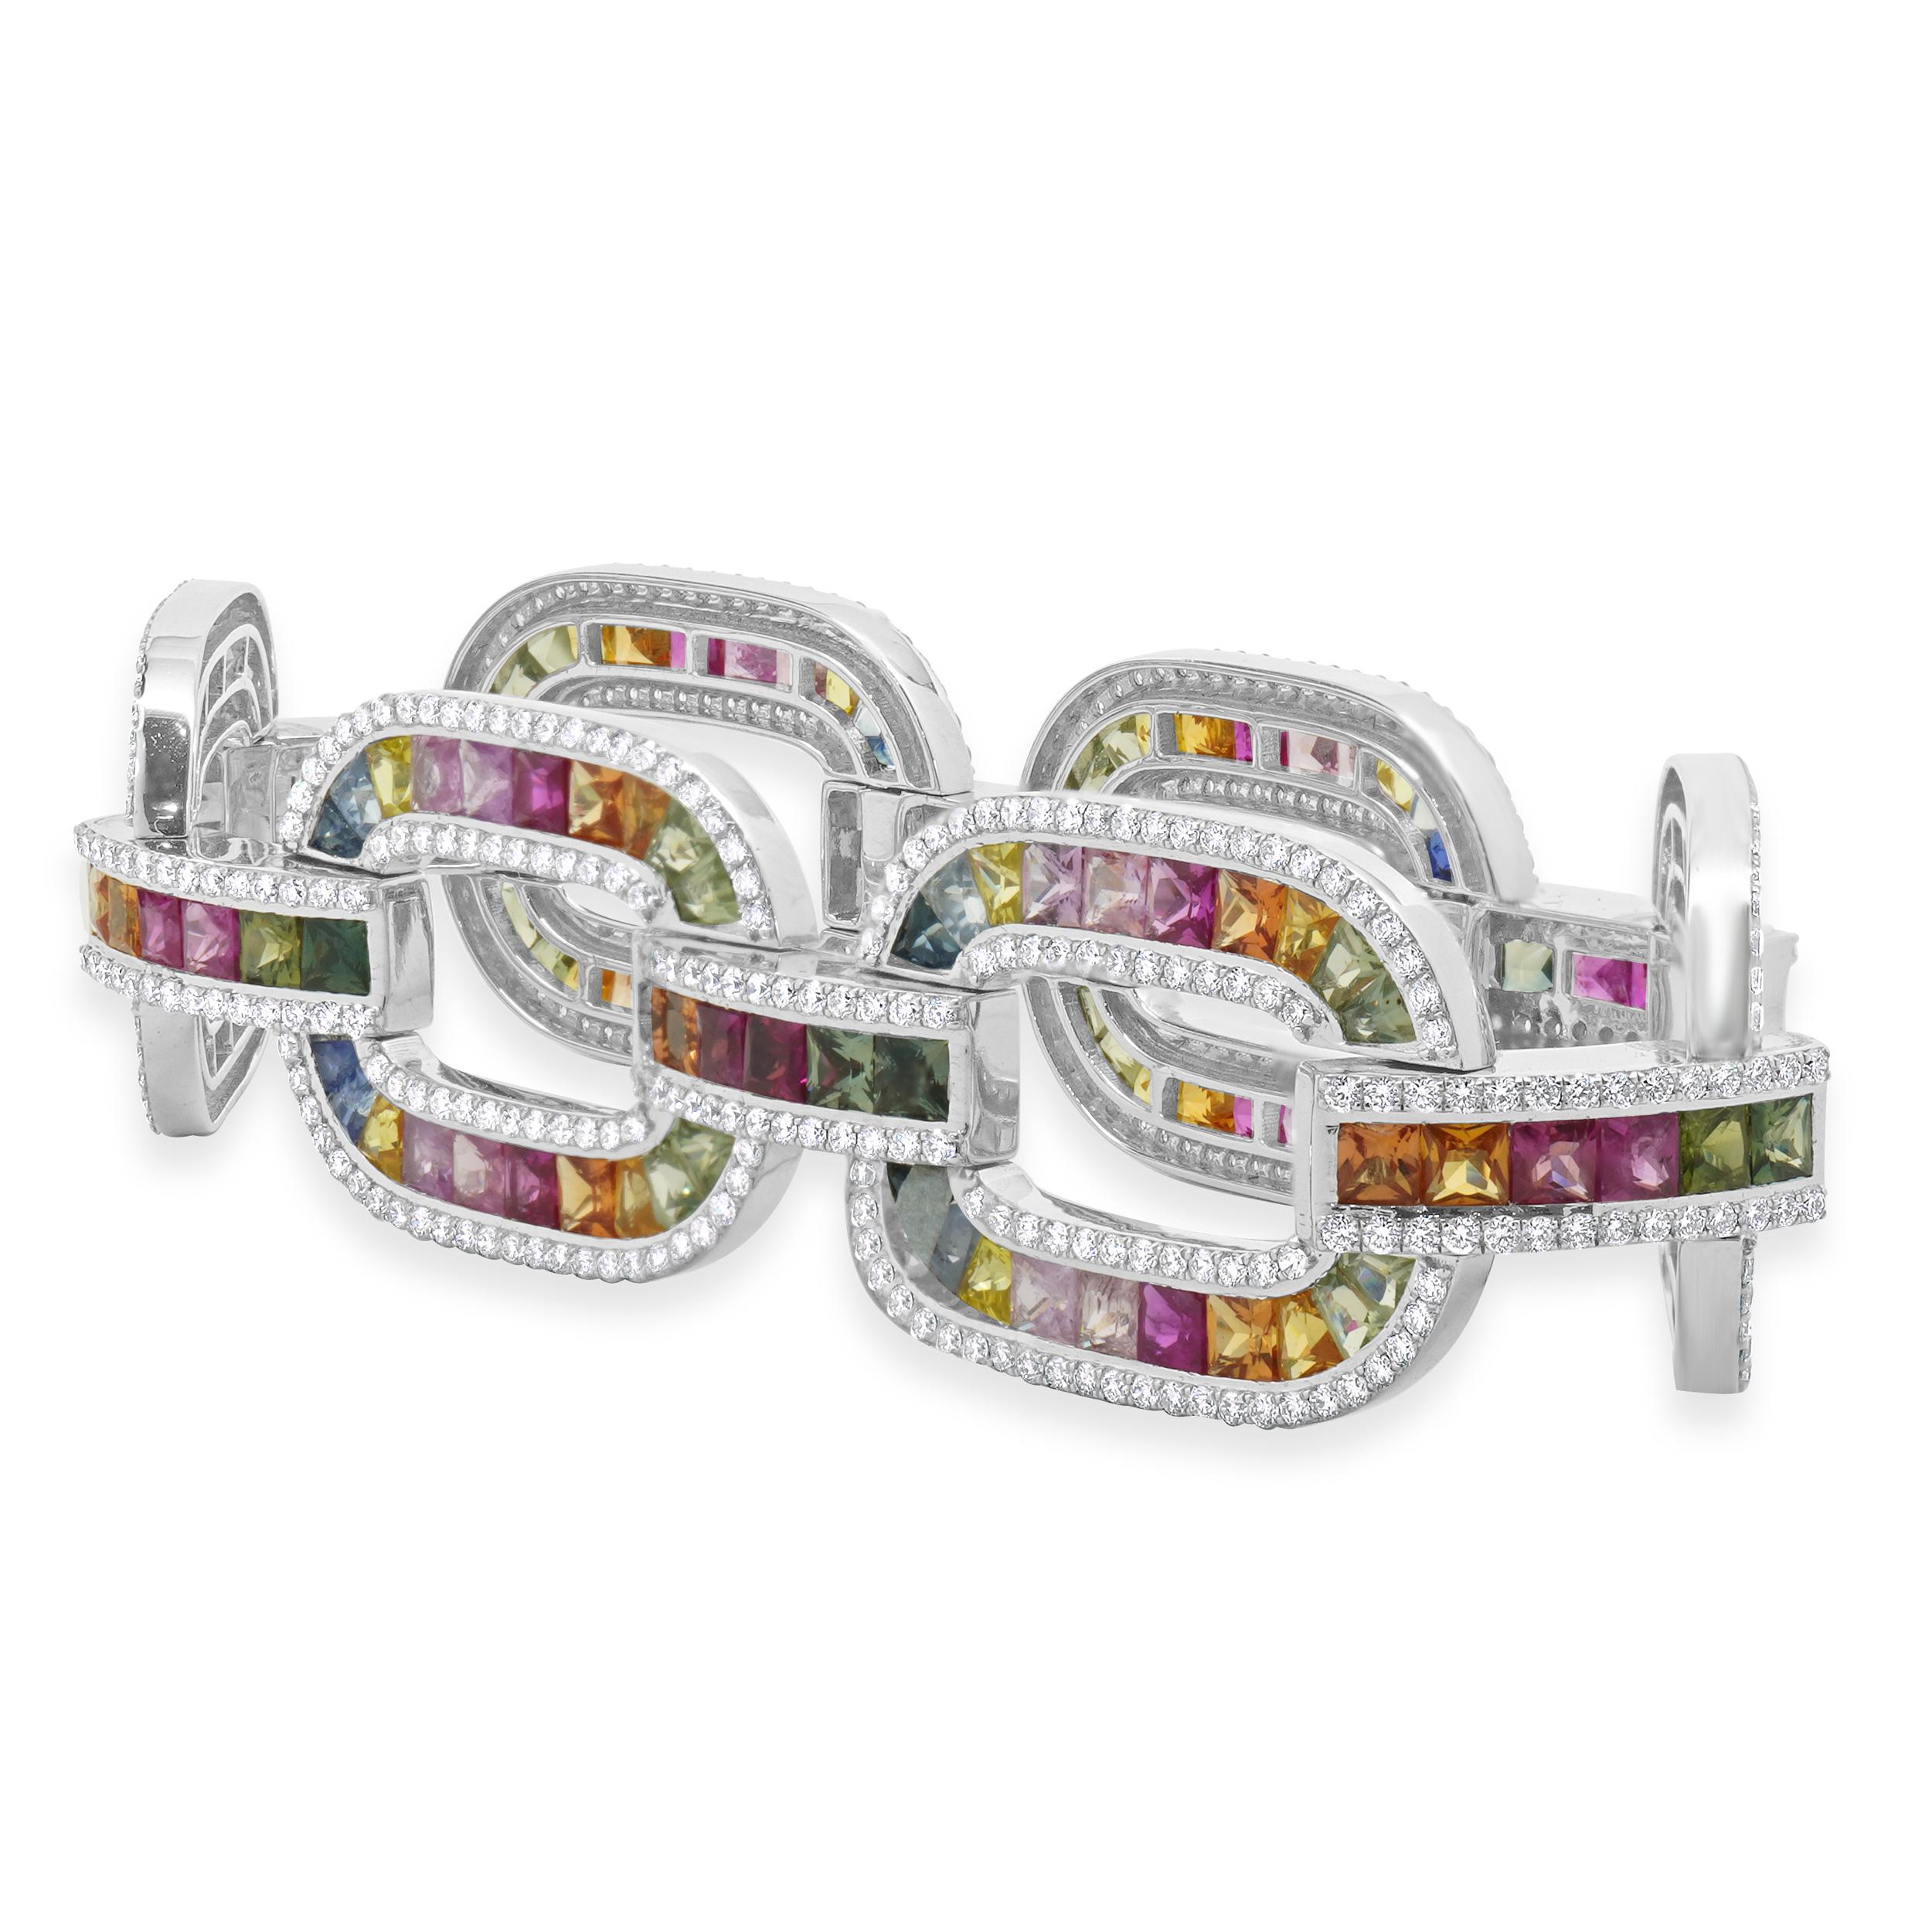 Designer: custom
Material: 14K white gold
Diamond: 572 round brilliant cut = 5.60cttw
Color: G
Clarity: VS-SI1
Multi-Colored Sapphire: 150 round cut = 28.72cttw
Weight: 41.68 grams
Dimensions: bracelet will fit up to a 8-inch wrist
